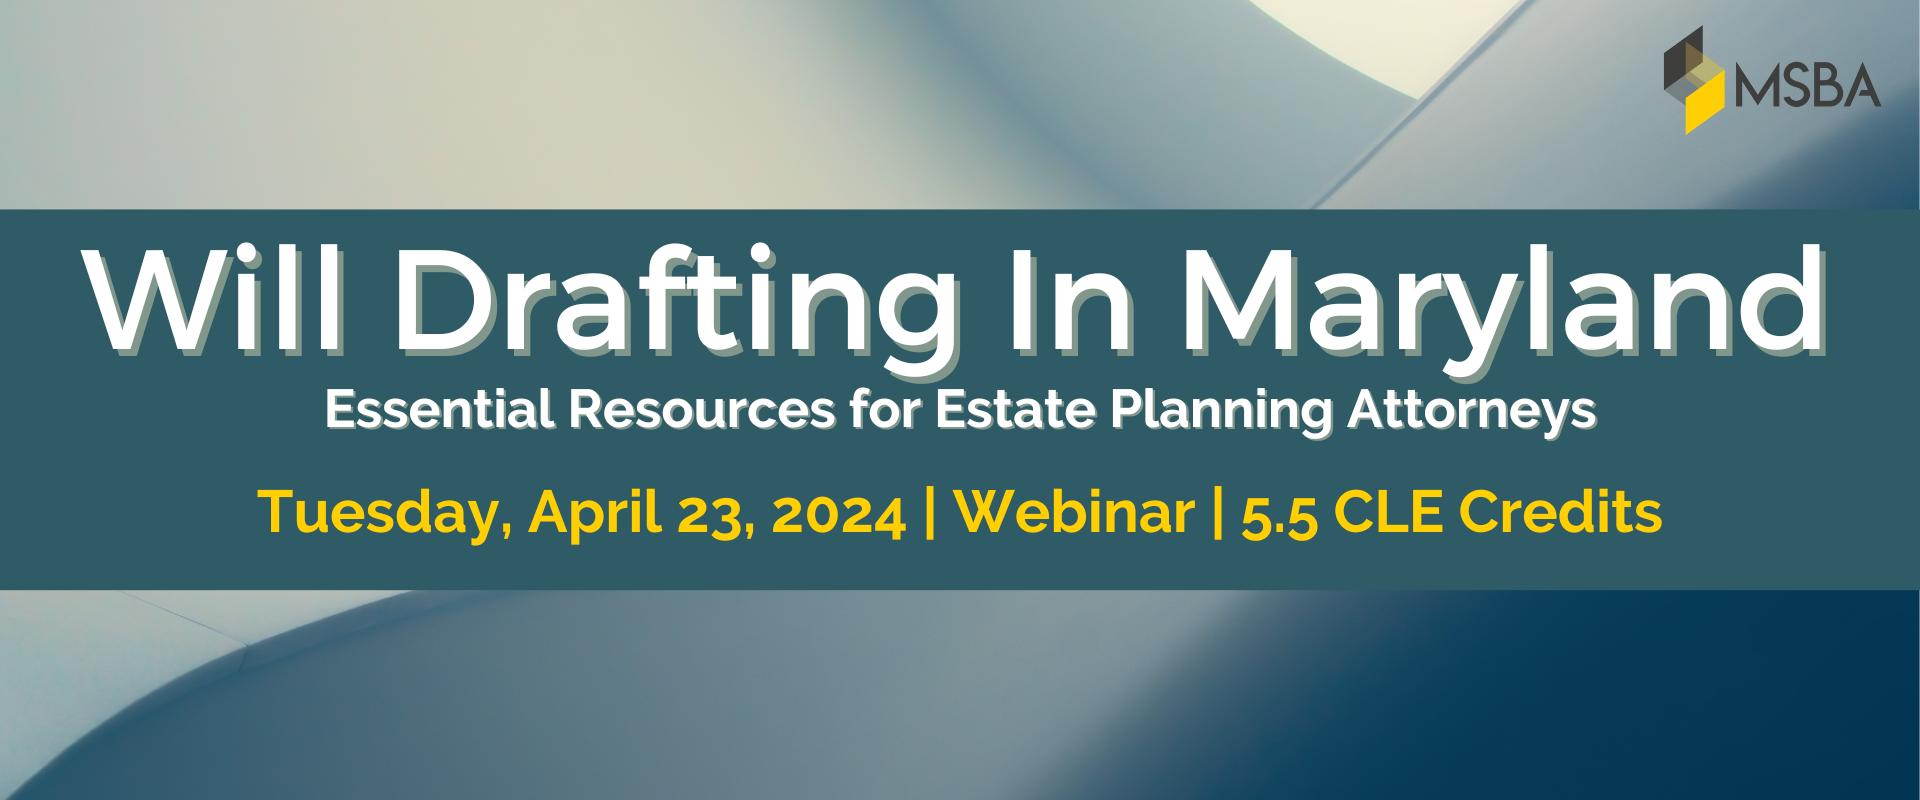 Will Drafting in MD Essential Resources for Estate Planning Attorneys